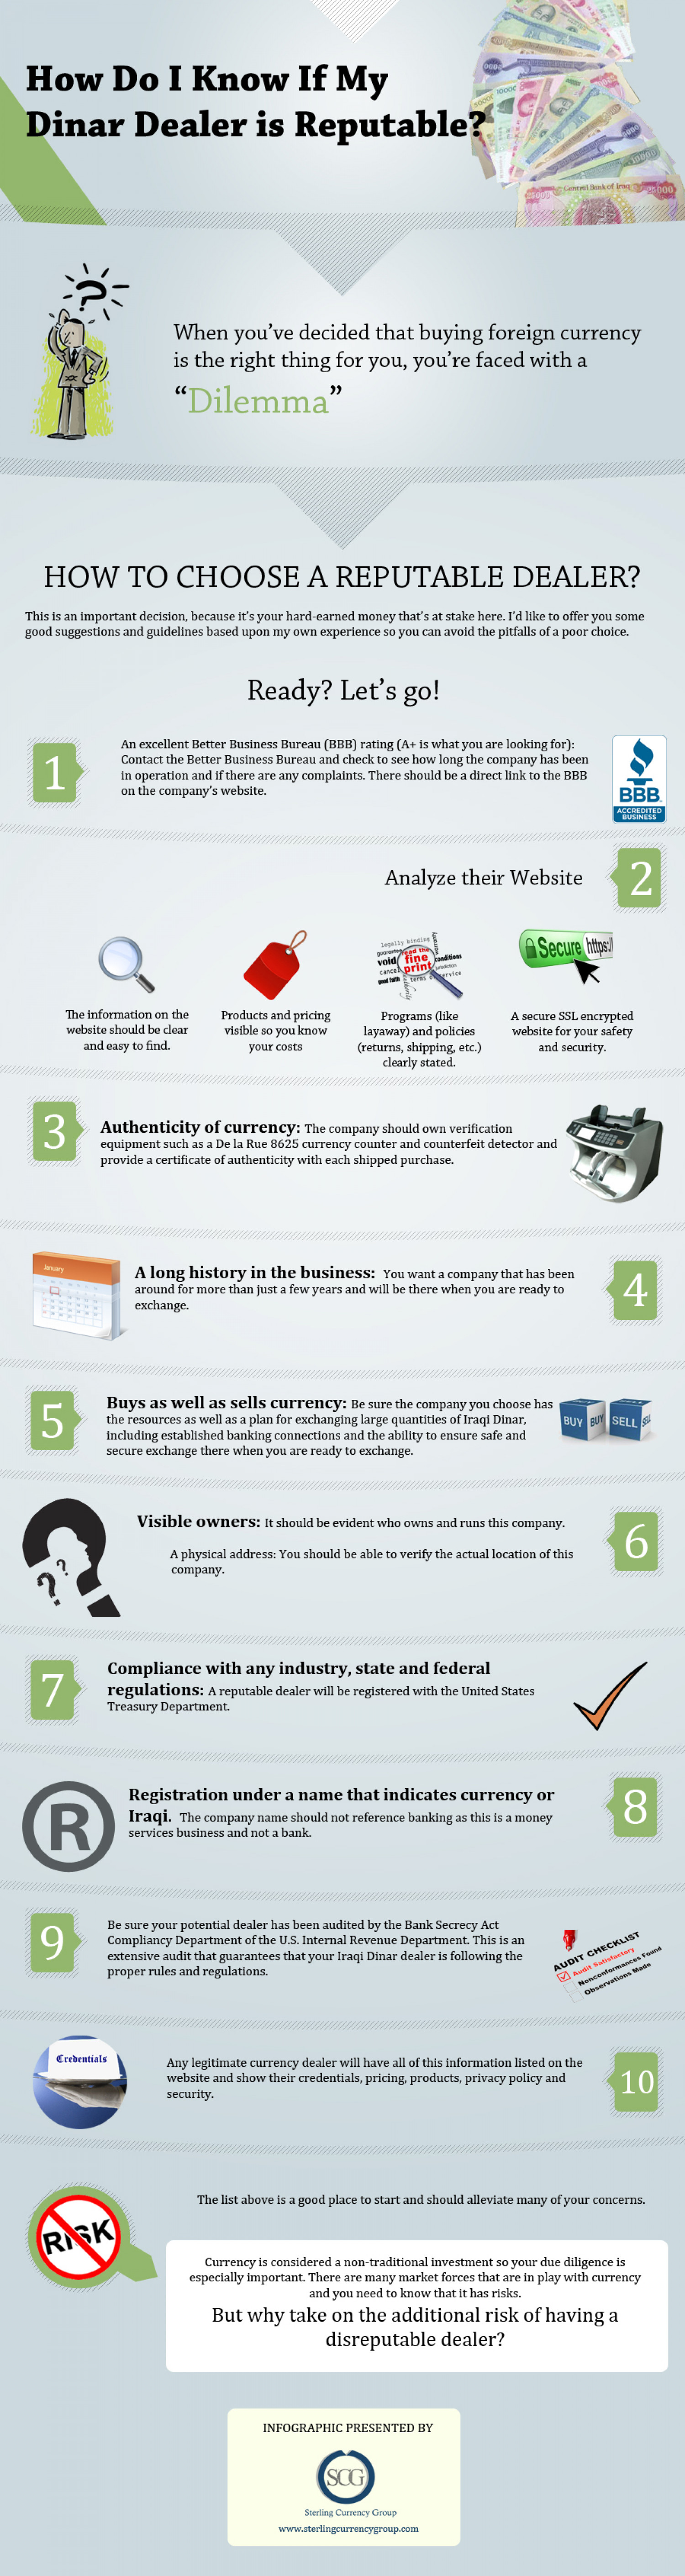 How Do I Know If My Dinar Dealer is Reputable? Infographic